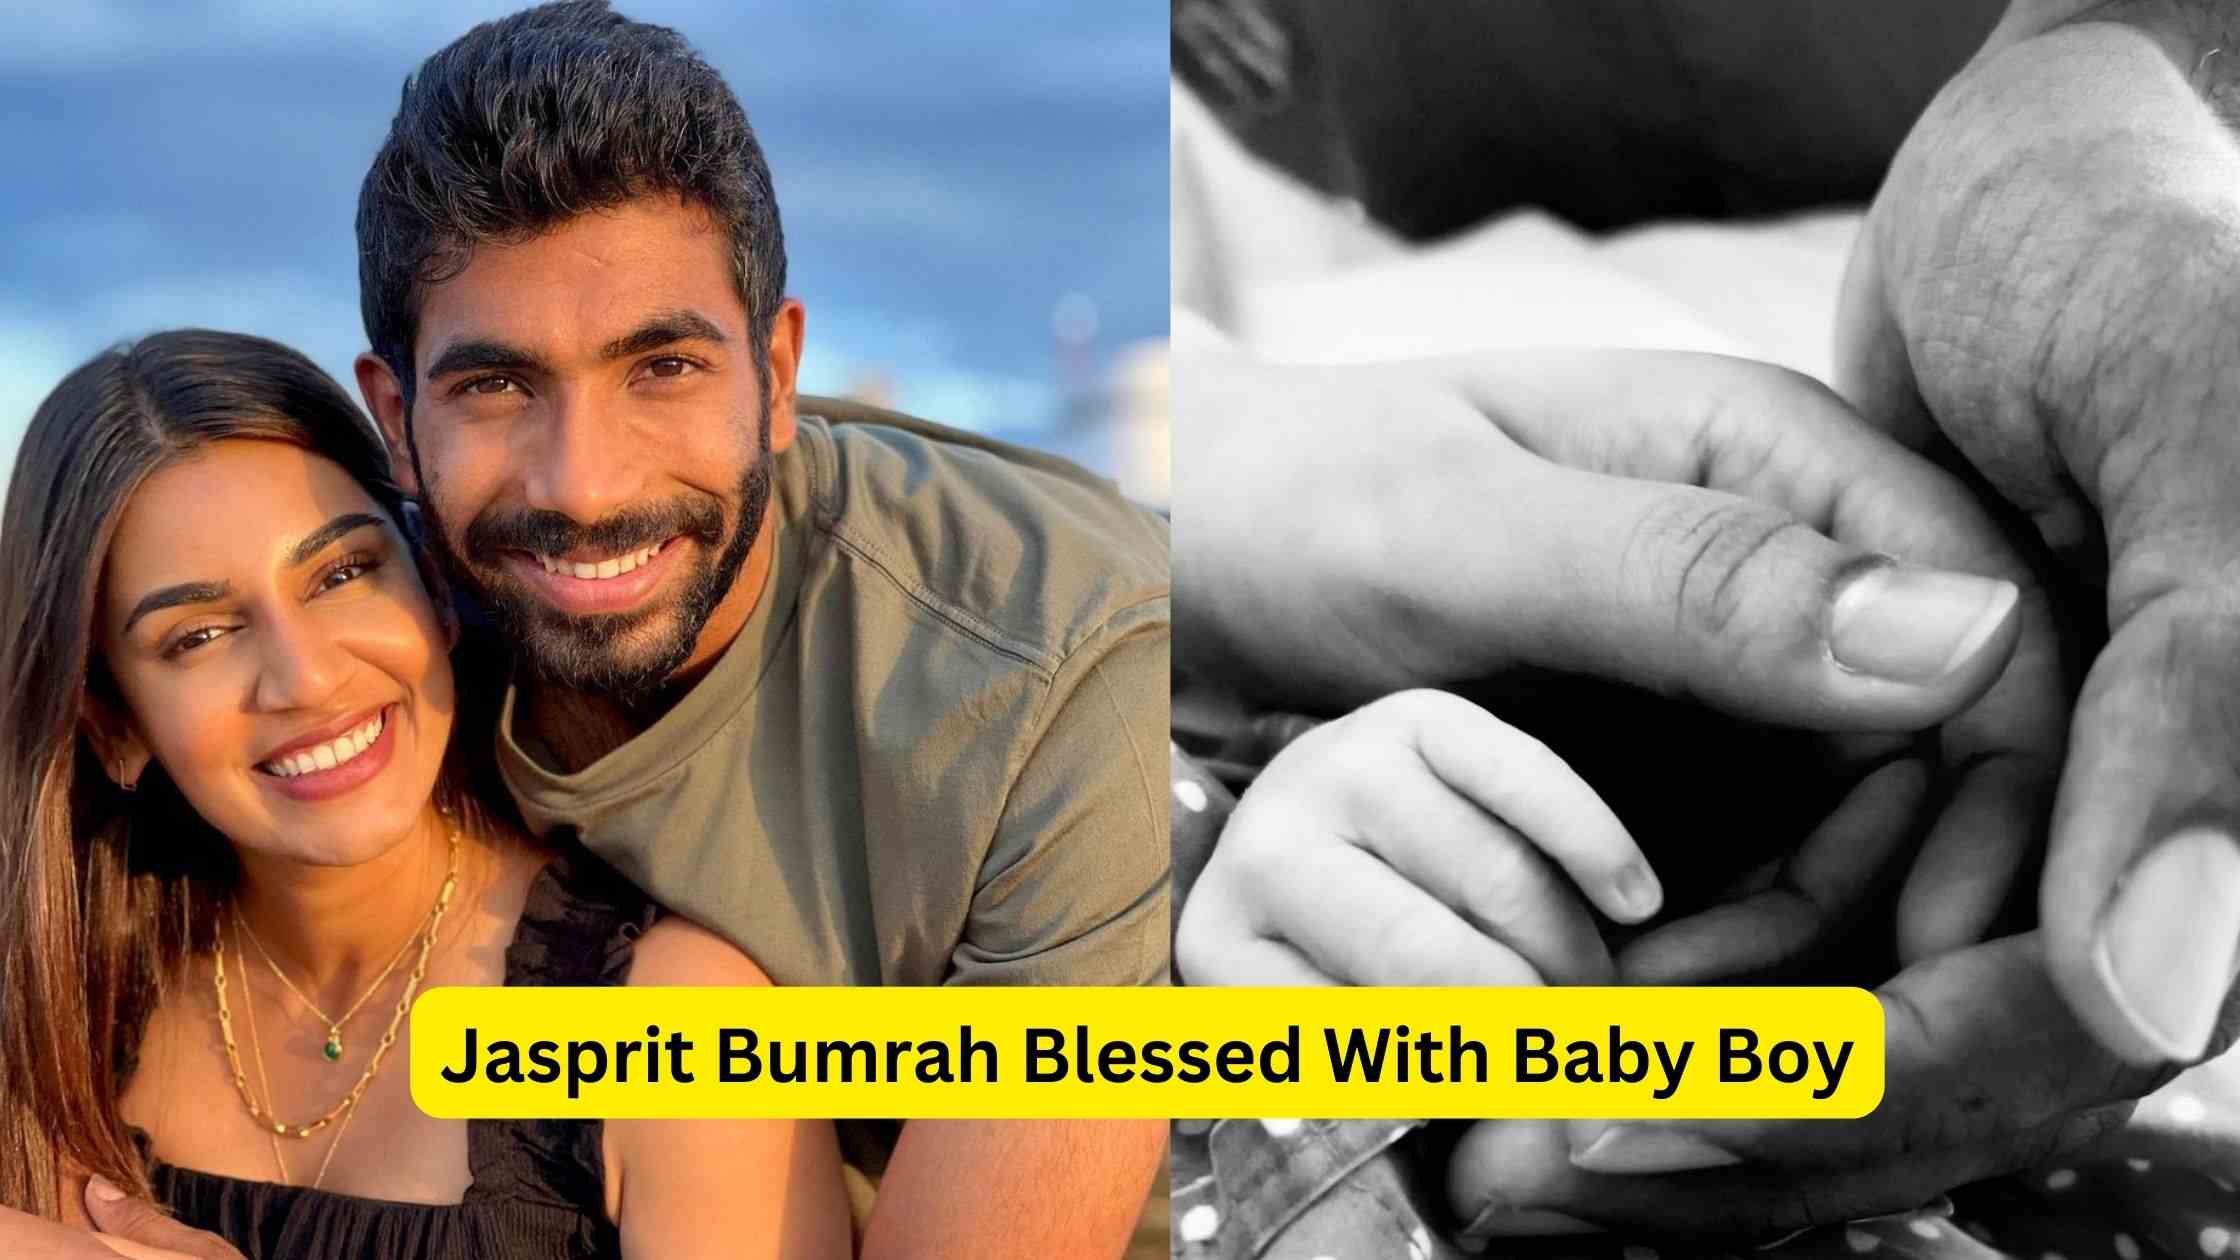 Jasprit Bumrah Blessed With Baby Boy, Posted On Instagram 